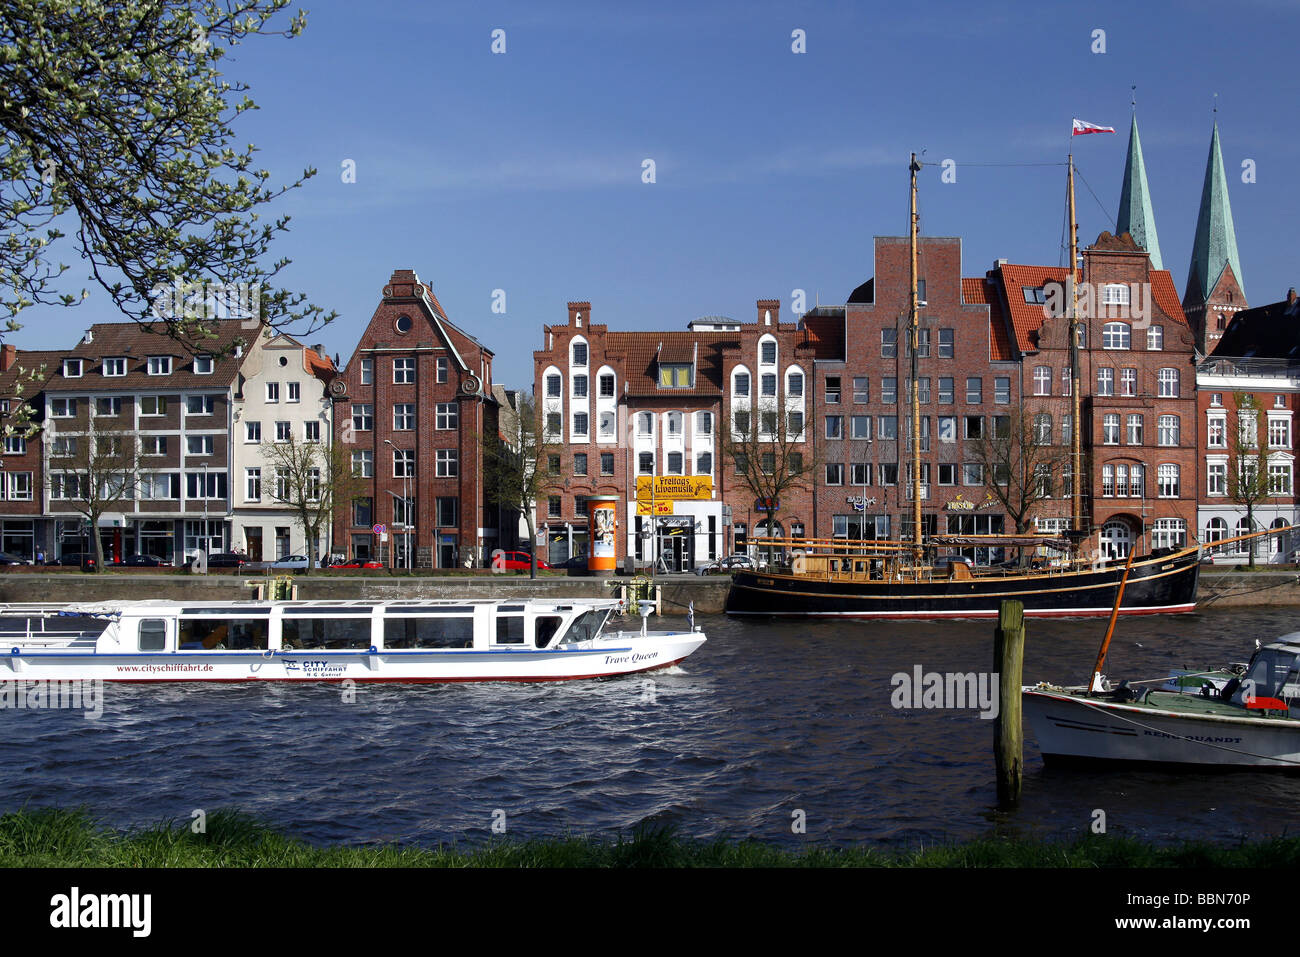 Hanseatic mansions and former warehouses at the Trave river, Hanseatic City of Luebeck, Schleswig-Holstein, Germany, Europe Stock Photo